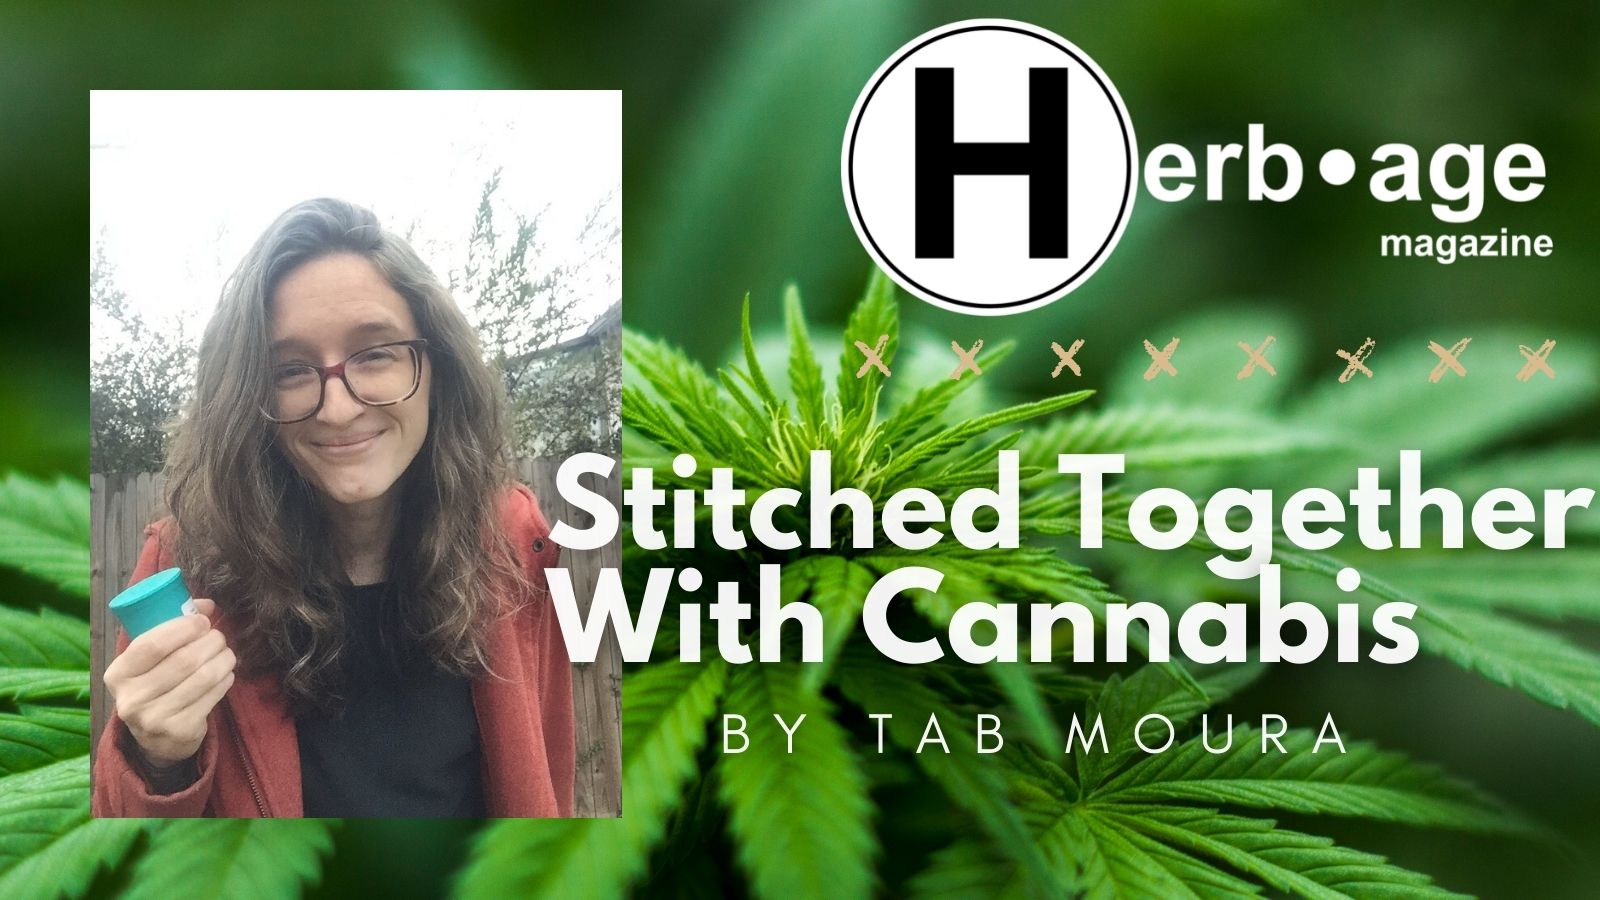 Stitched Together With Cannabis